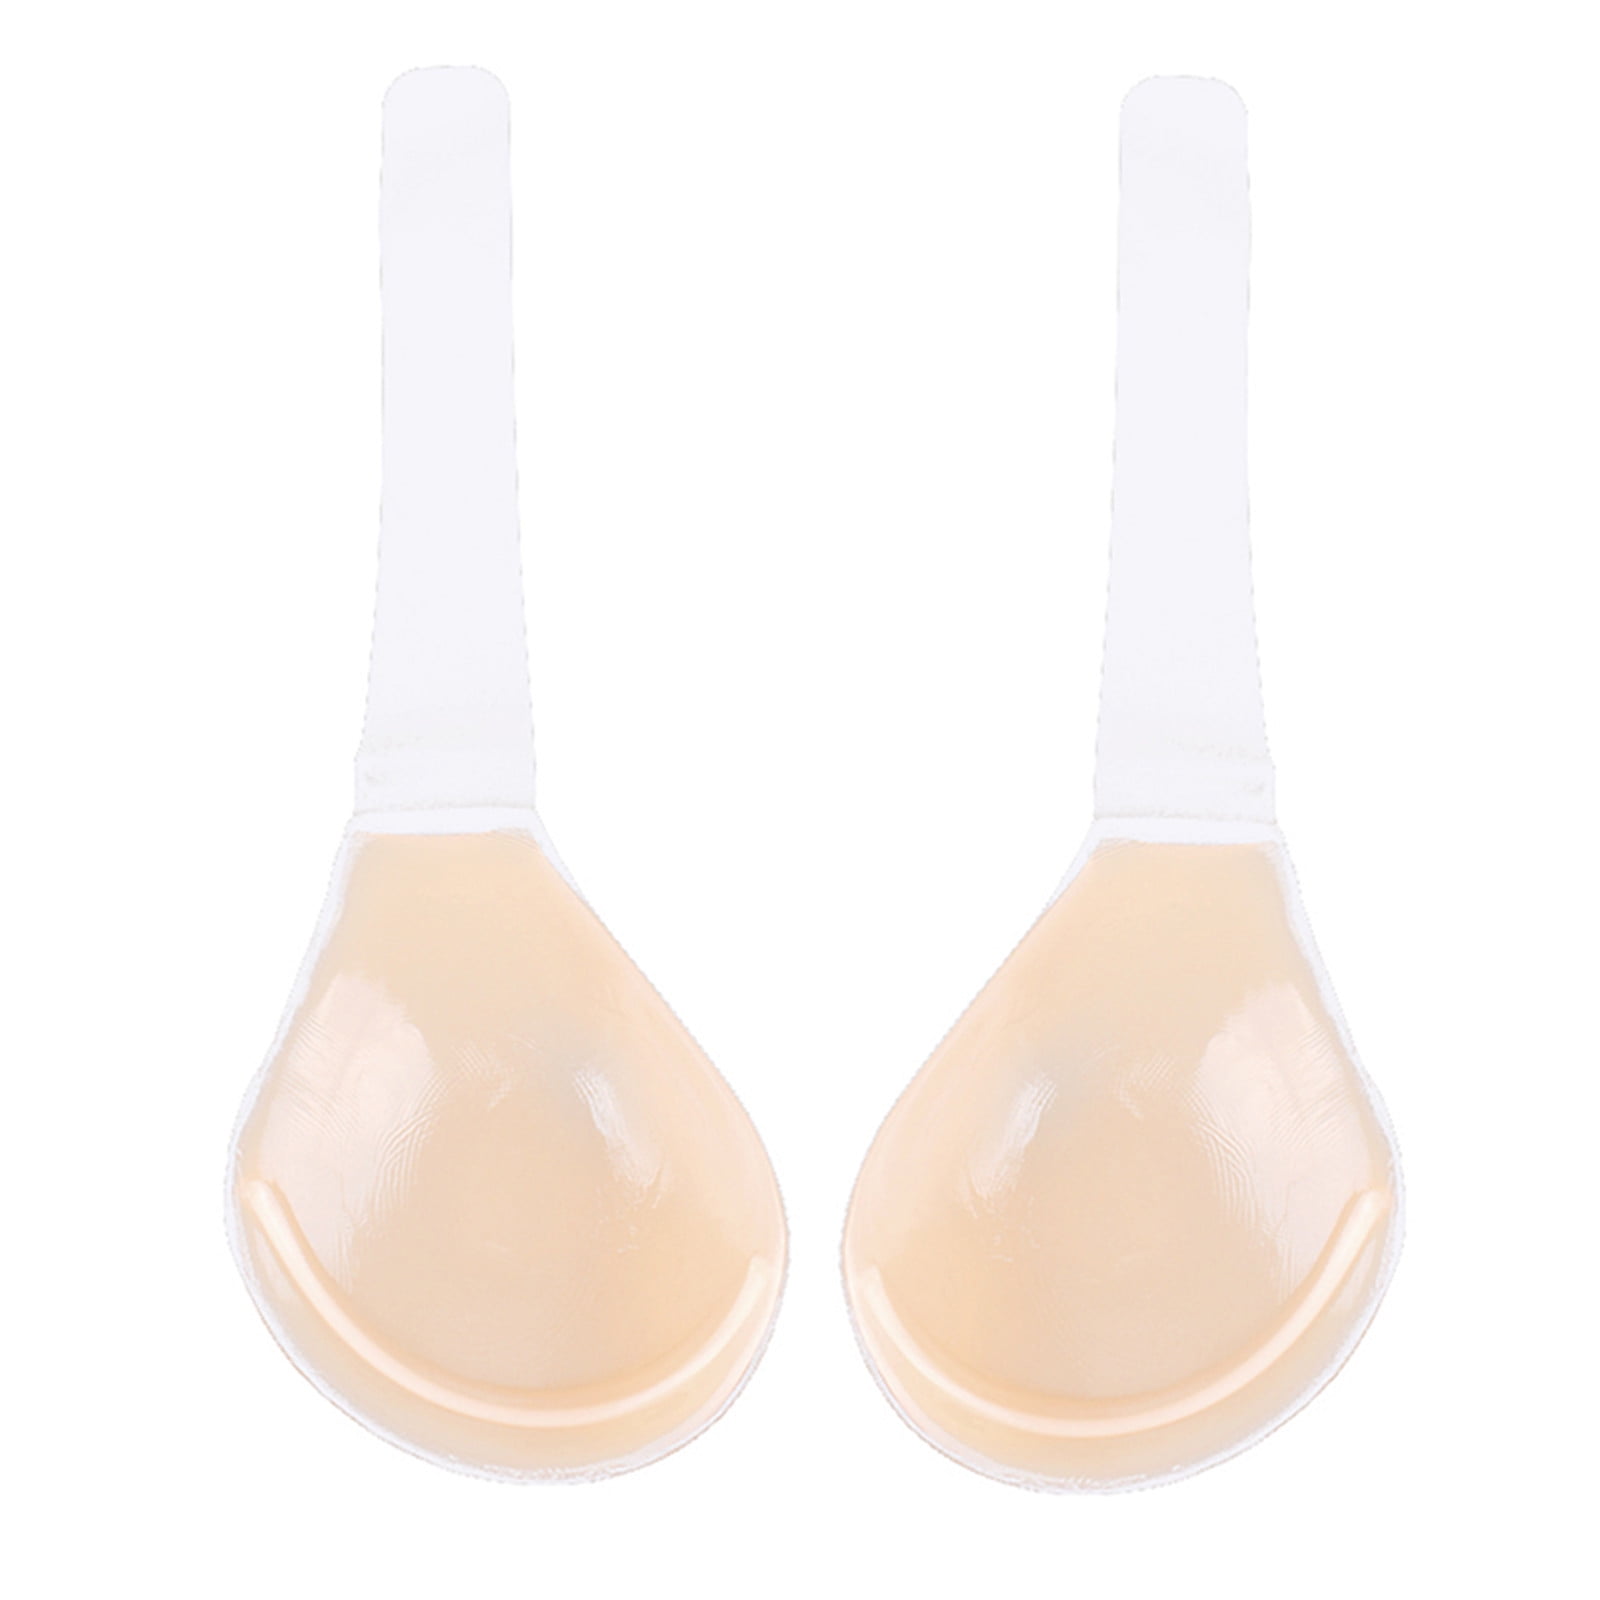 Lolmot Invisilift Bra, Invisible Lift Up Bra, Adhesive Conceal